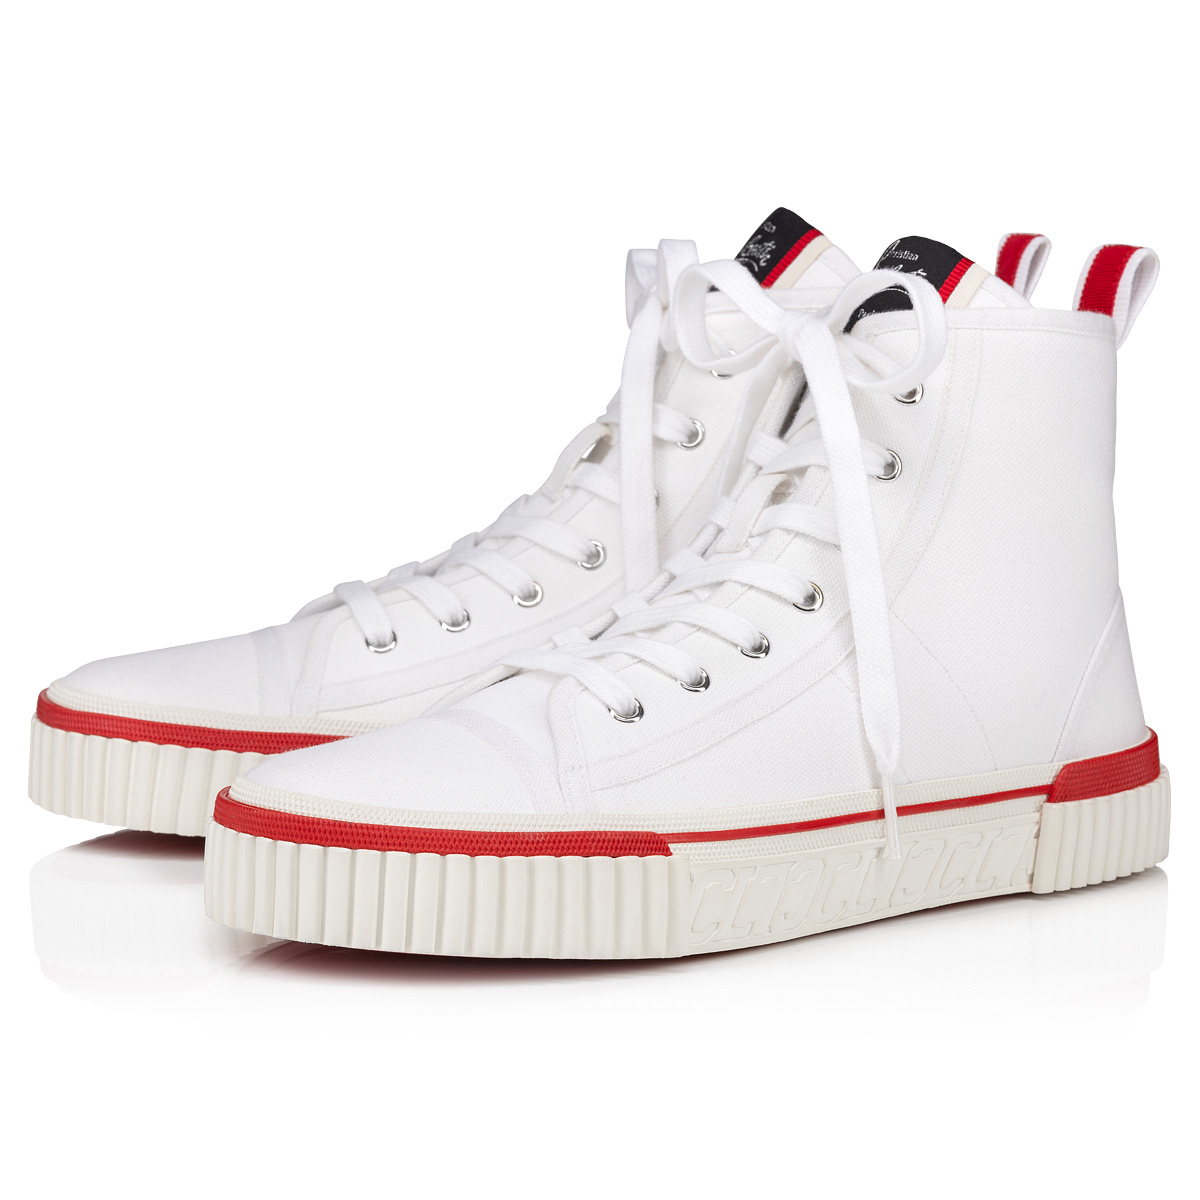 #034;Red Bottoms" Christian Louboutin Leather High Top Size